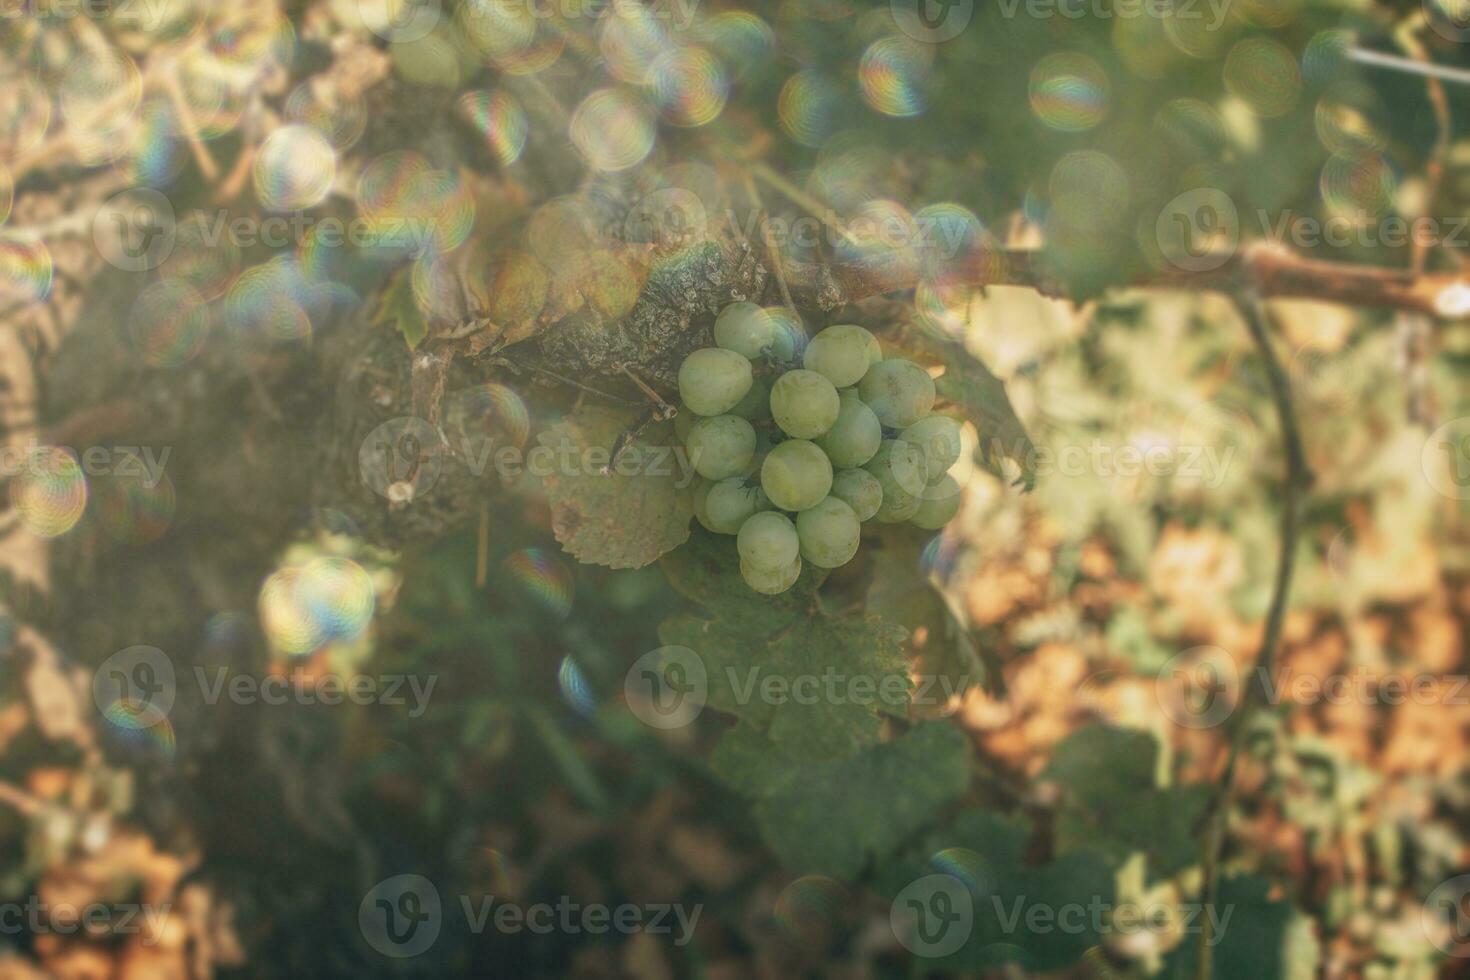 ripe green grapes on a vine in a vineyard on a warm autumn day in close-up photo